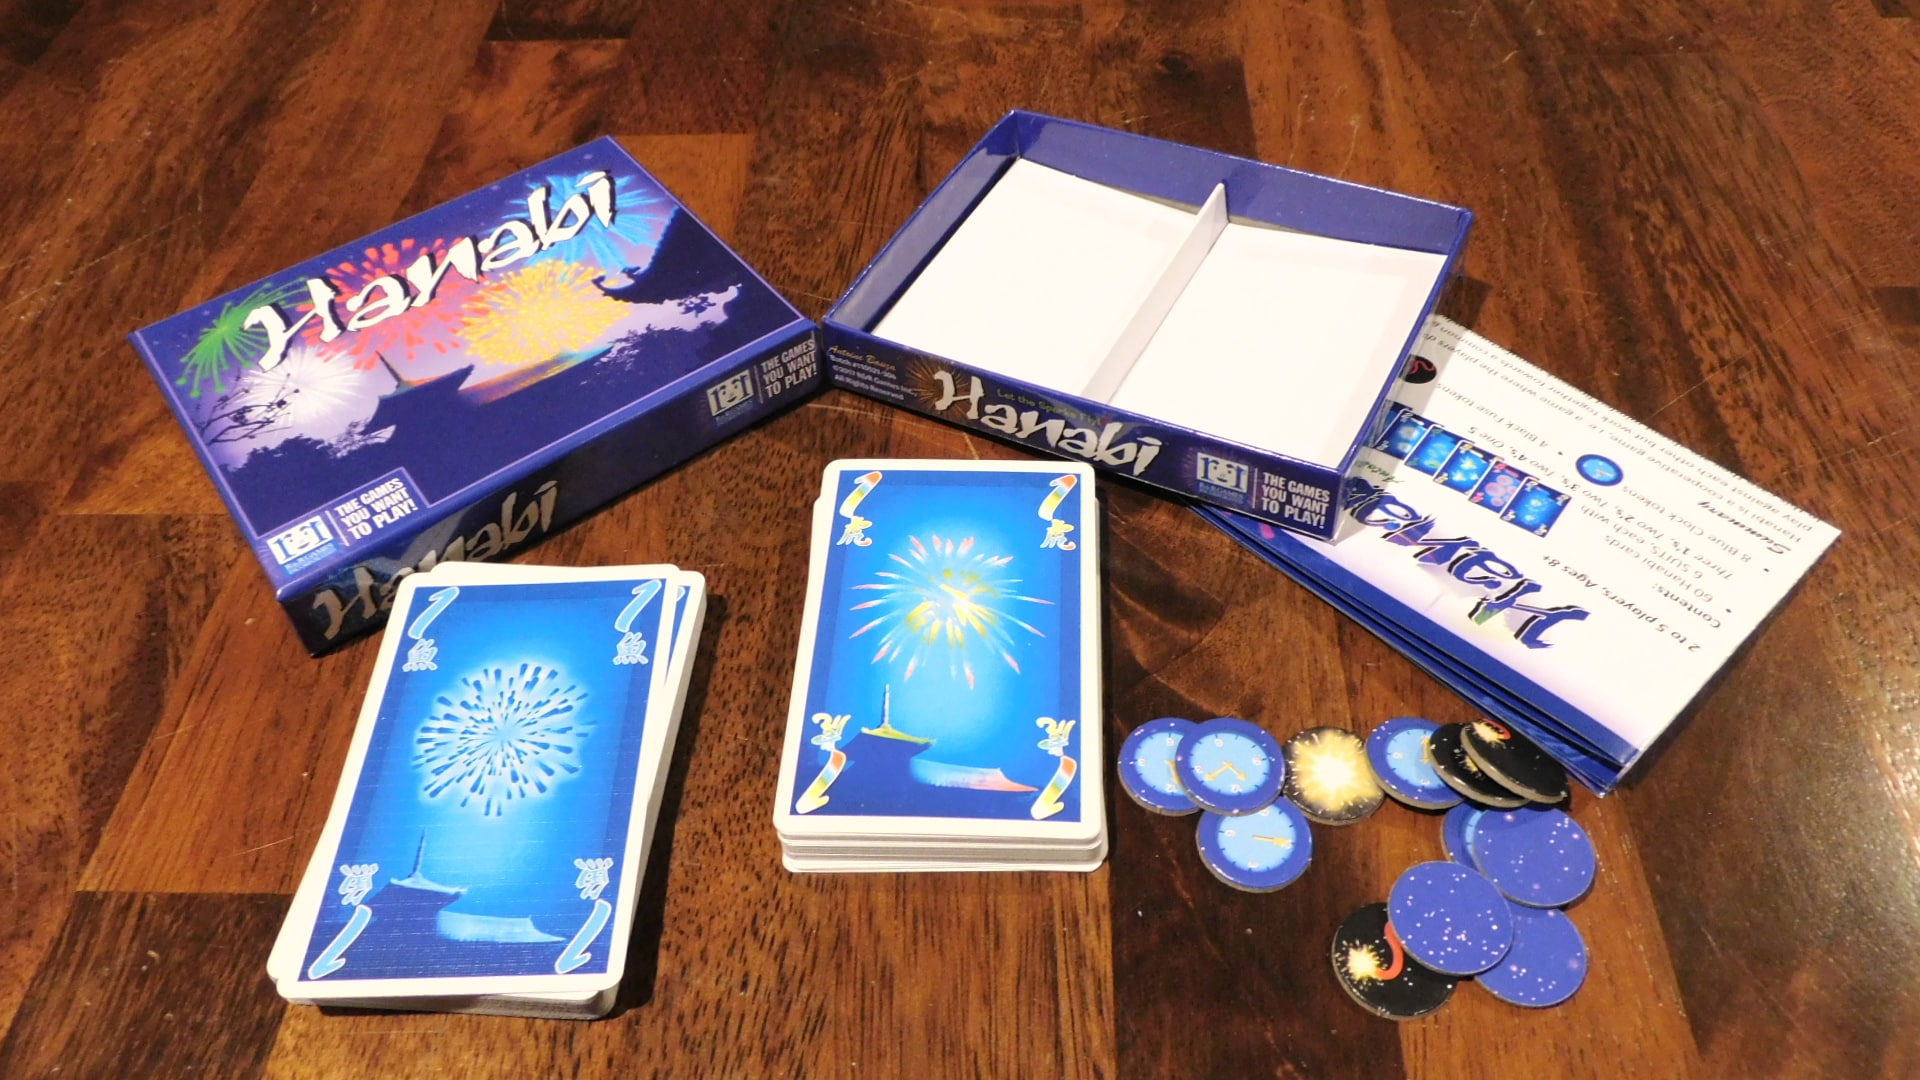 An open box of Hanabi with all its components on the table.